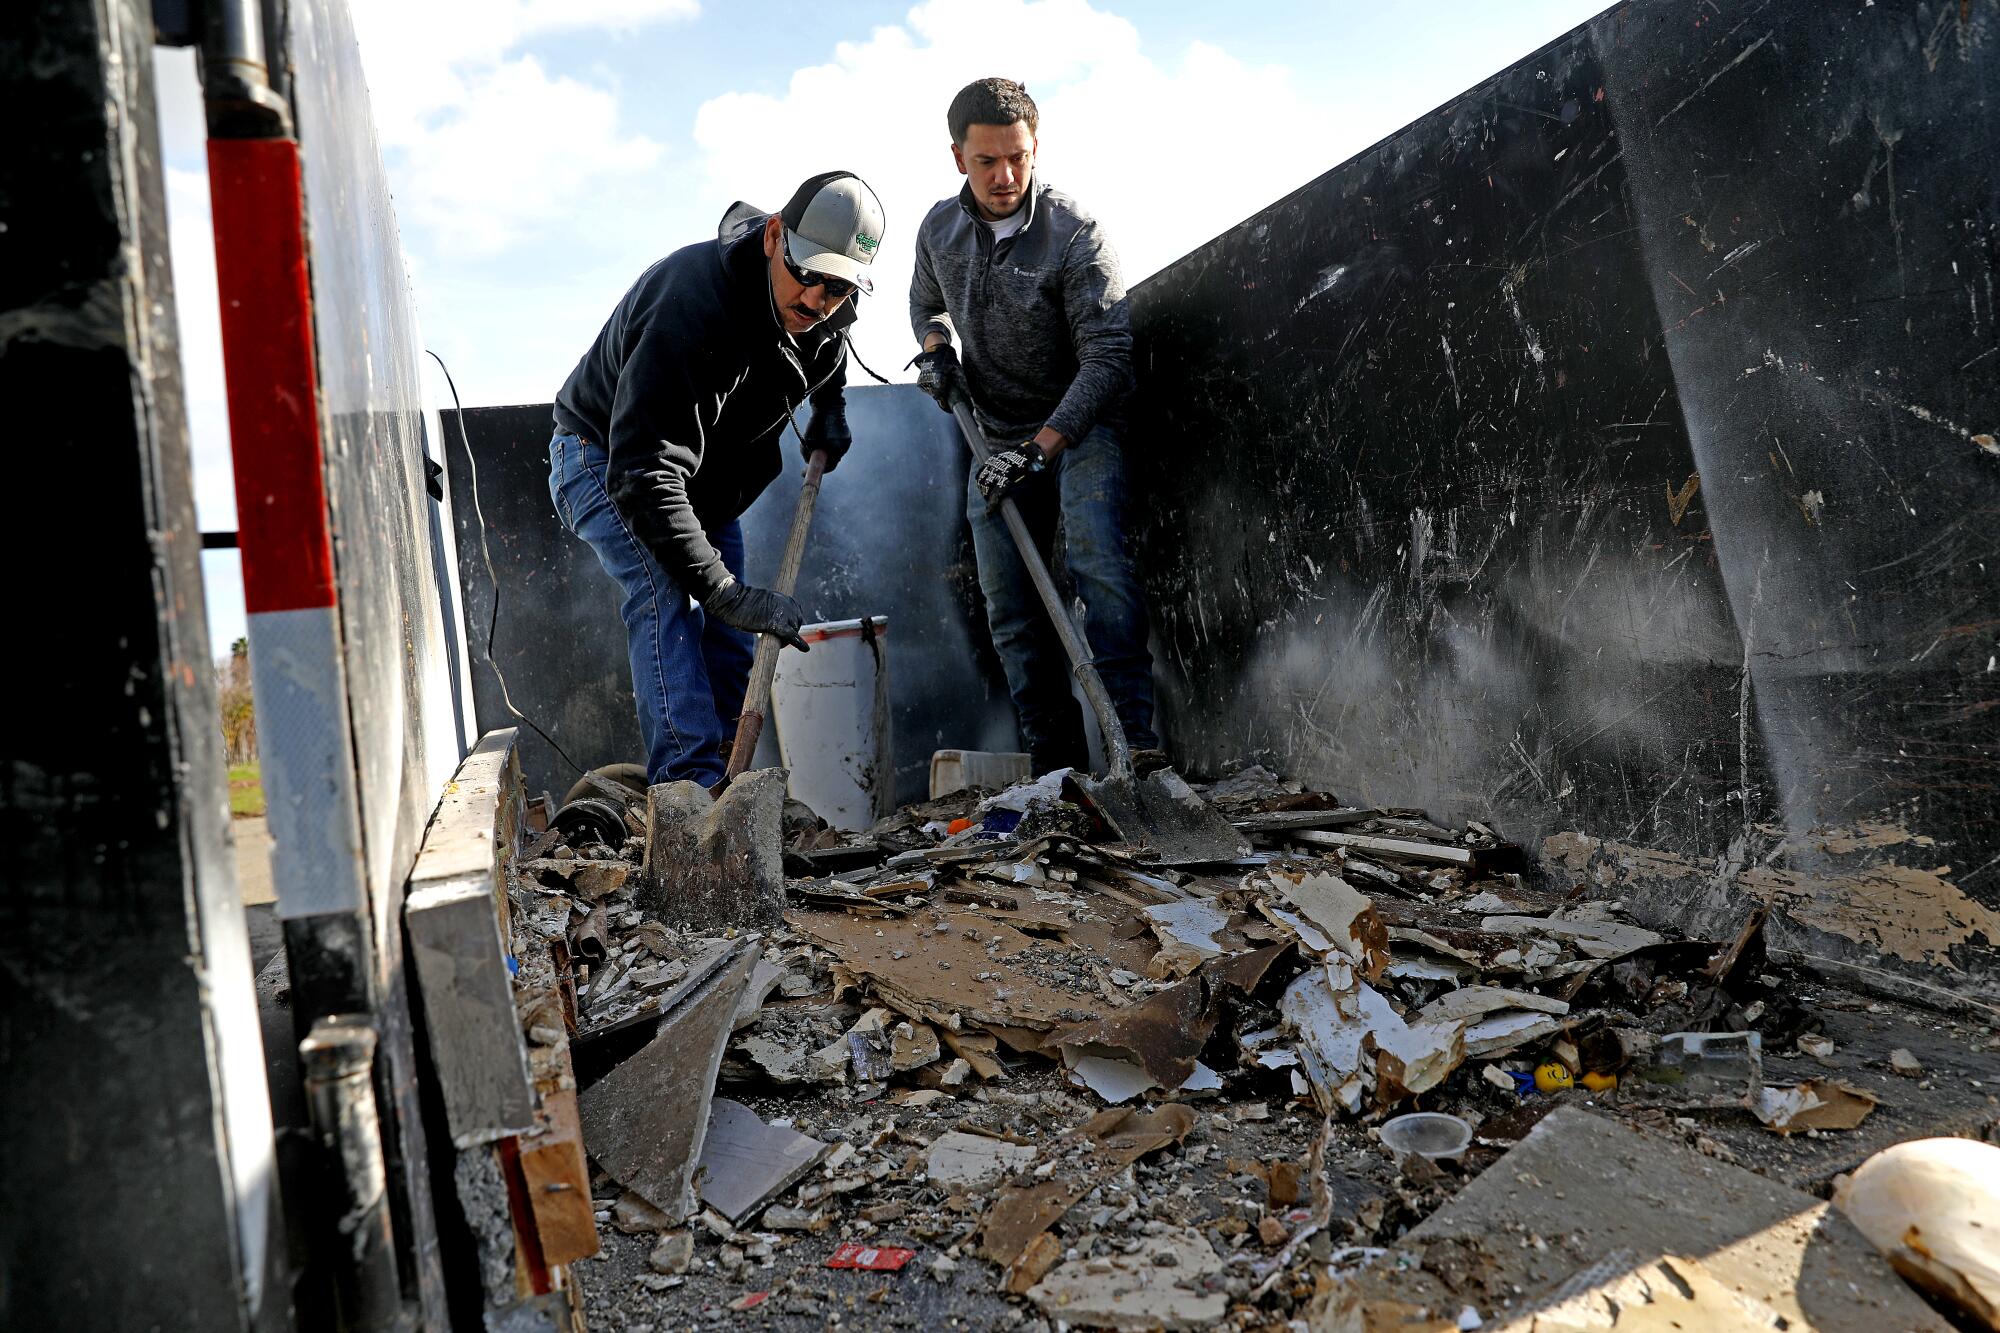 Using shovels, two men move chunks of flood debris from a trailer into a trash bin.